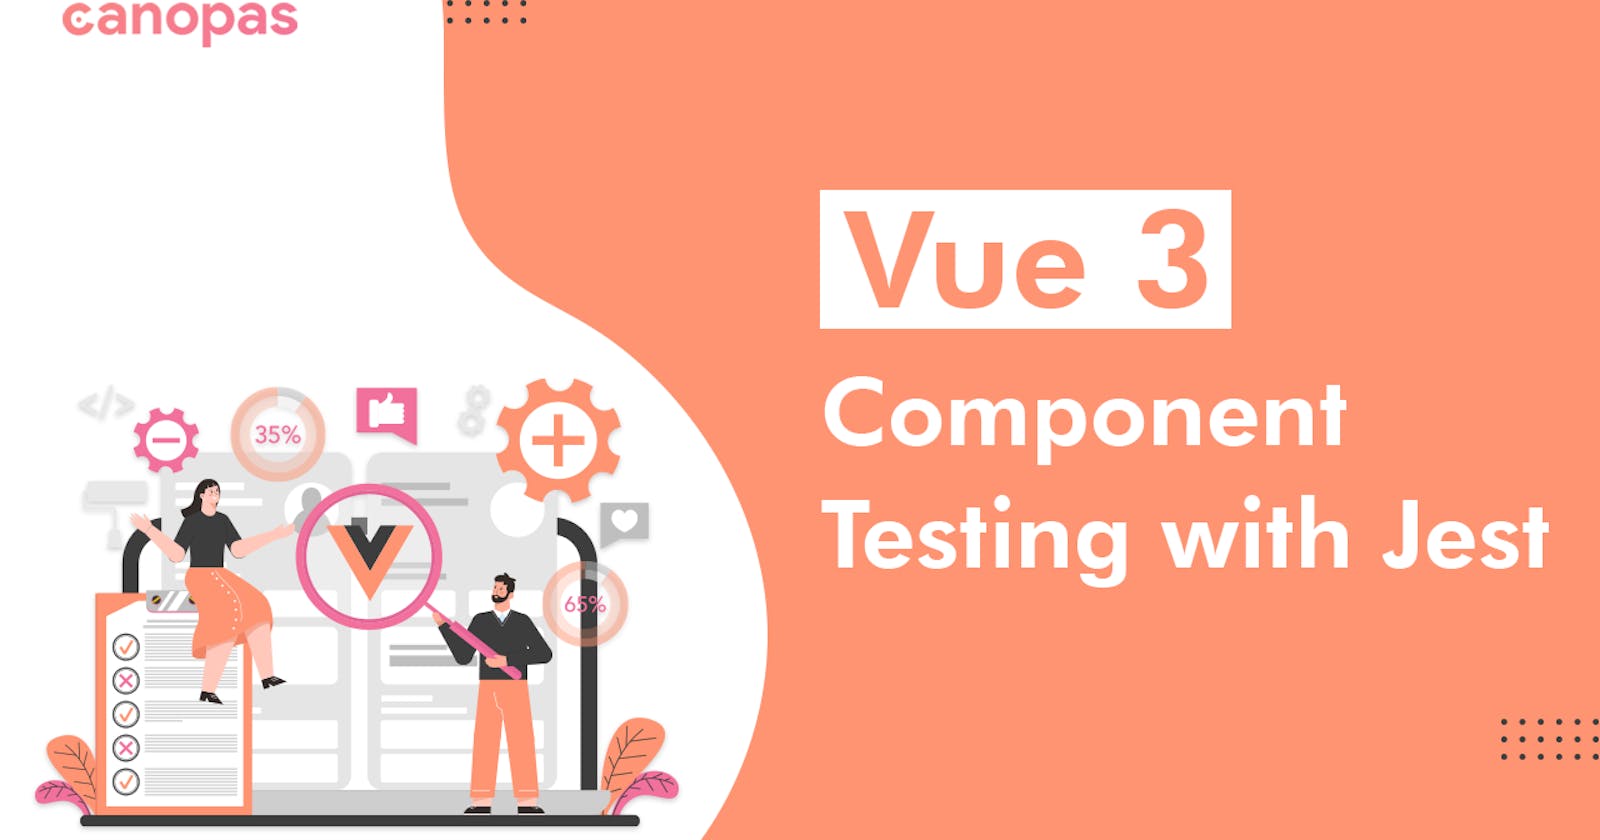 How to test Vue 3 components with Jest?